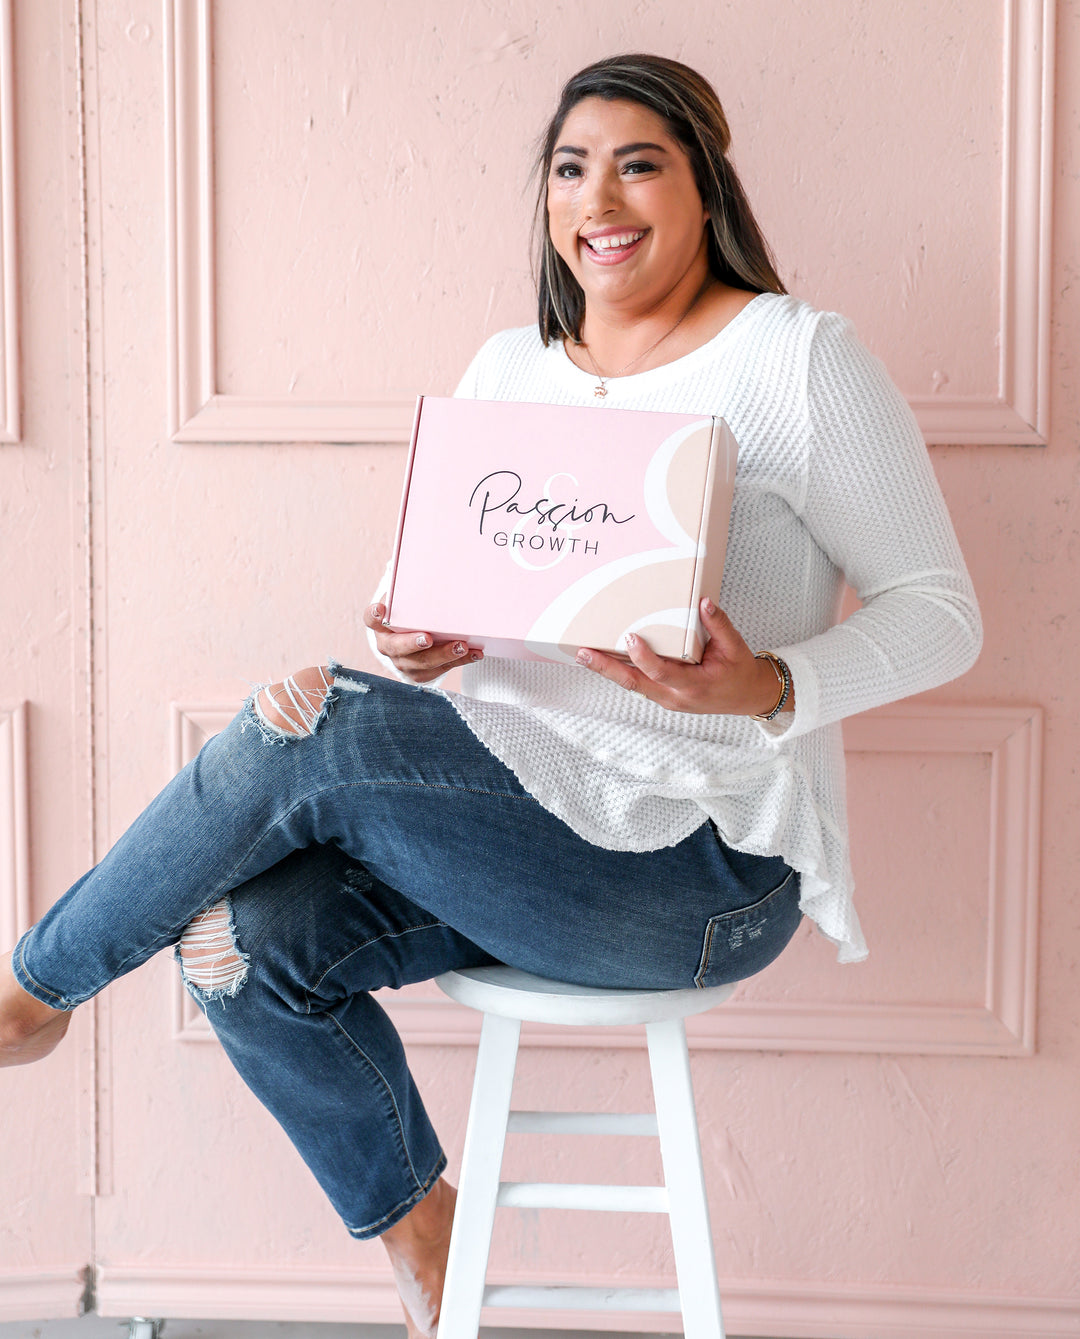 Featured #bloomgirl: Lorena Hixson; Owner of Passion & Growth!